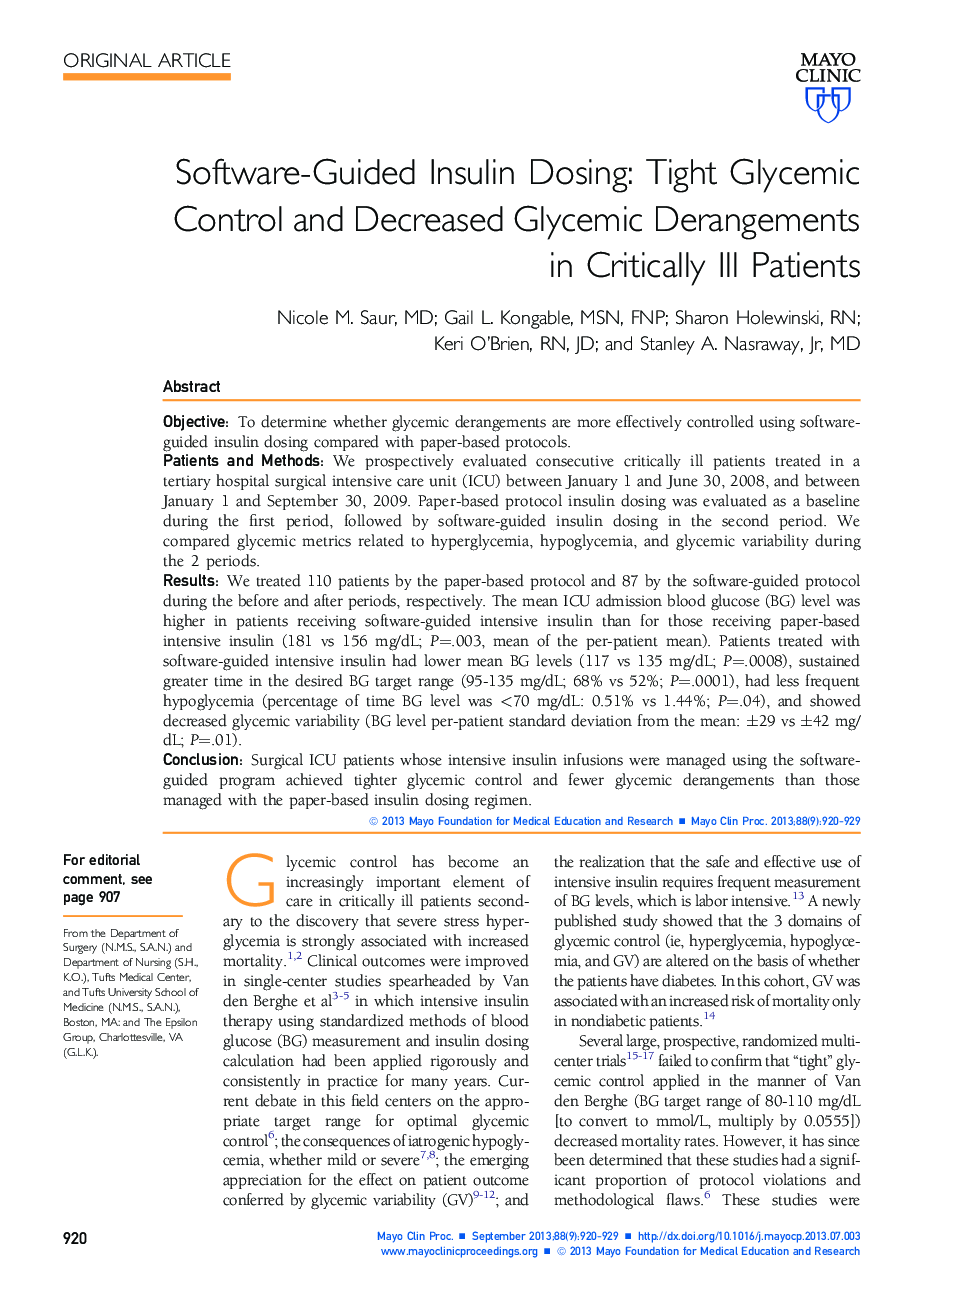 Software-Guided Insulin Dosing: Tight Glycemic Control and Decreased Glycemic Derangements in Critically Ill Patients